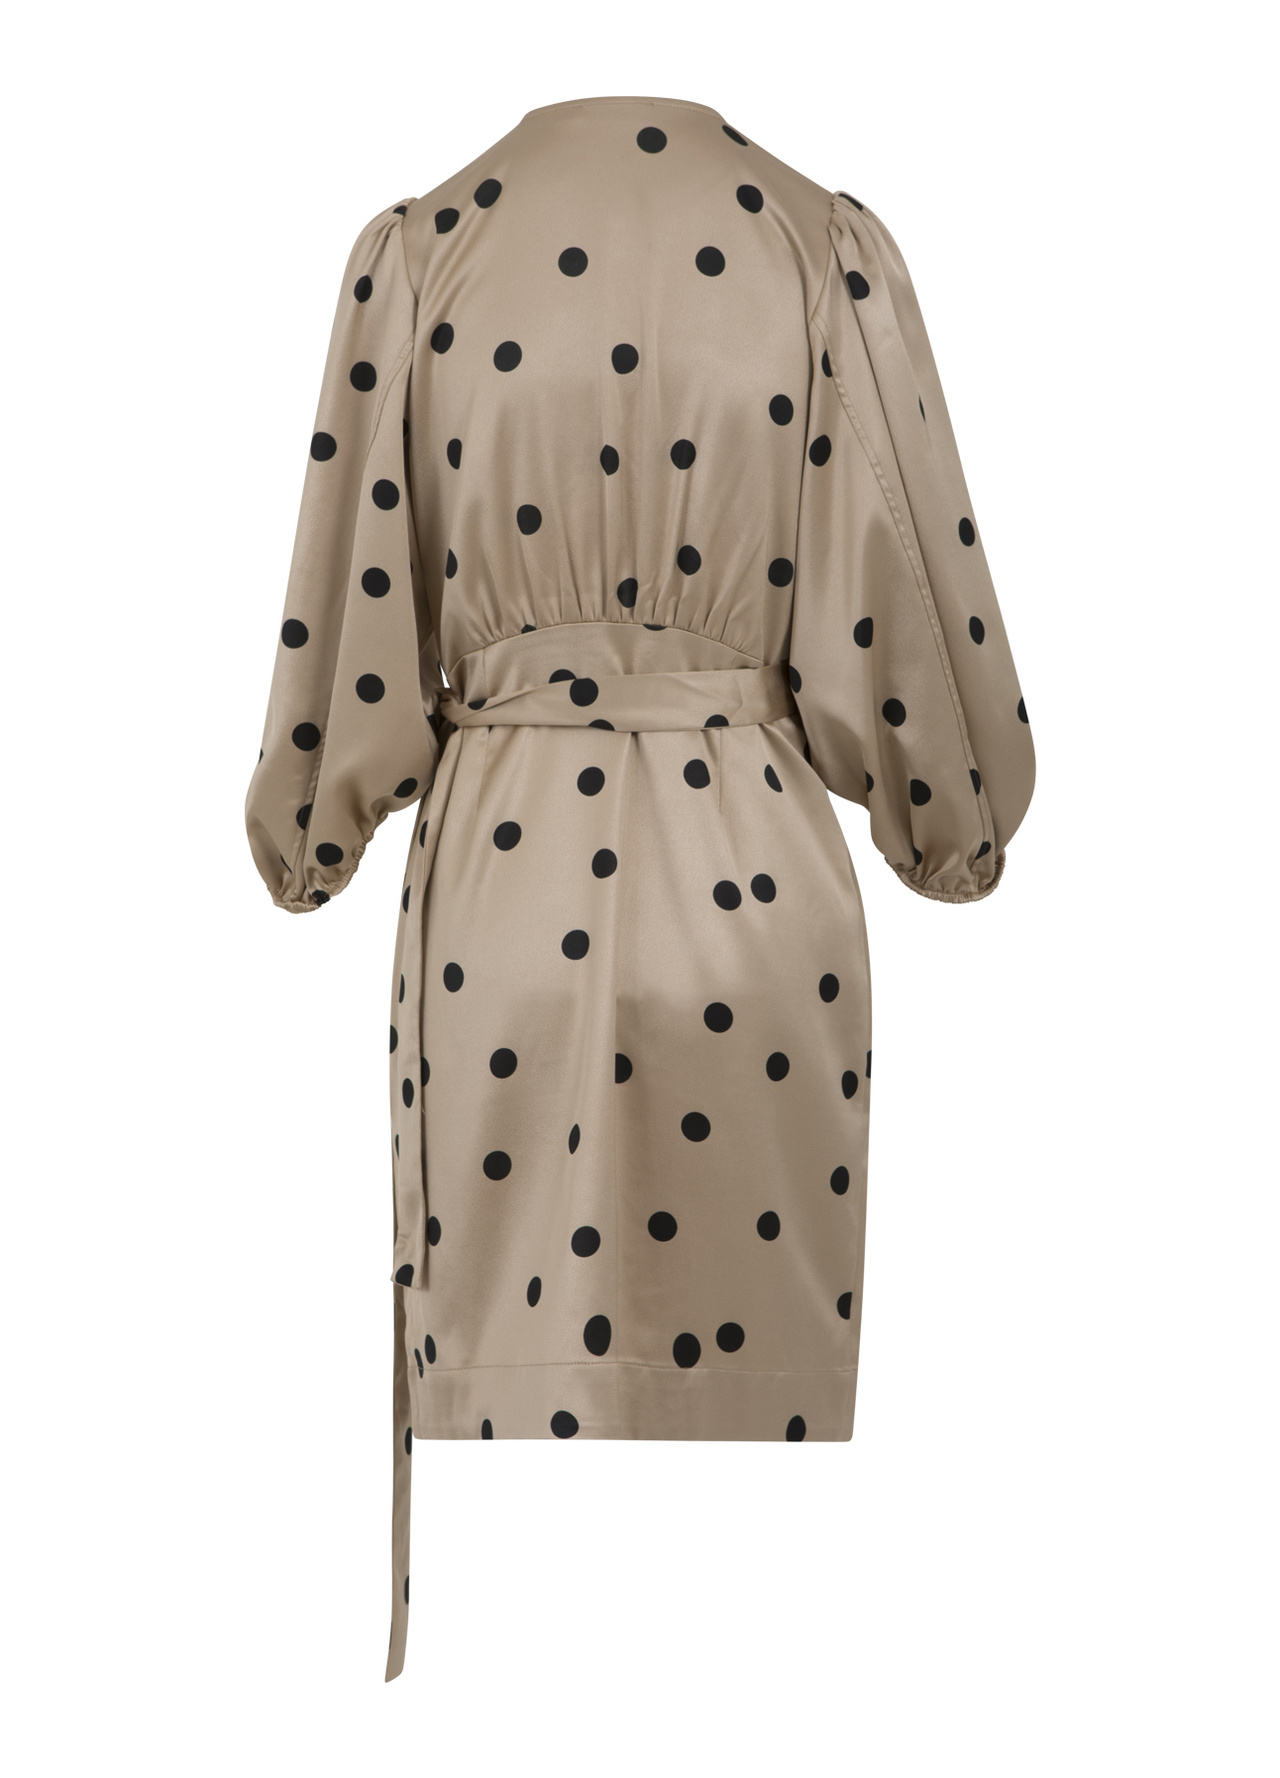 Dress with Wide Sleeves in Dot Print 42